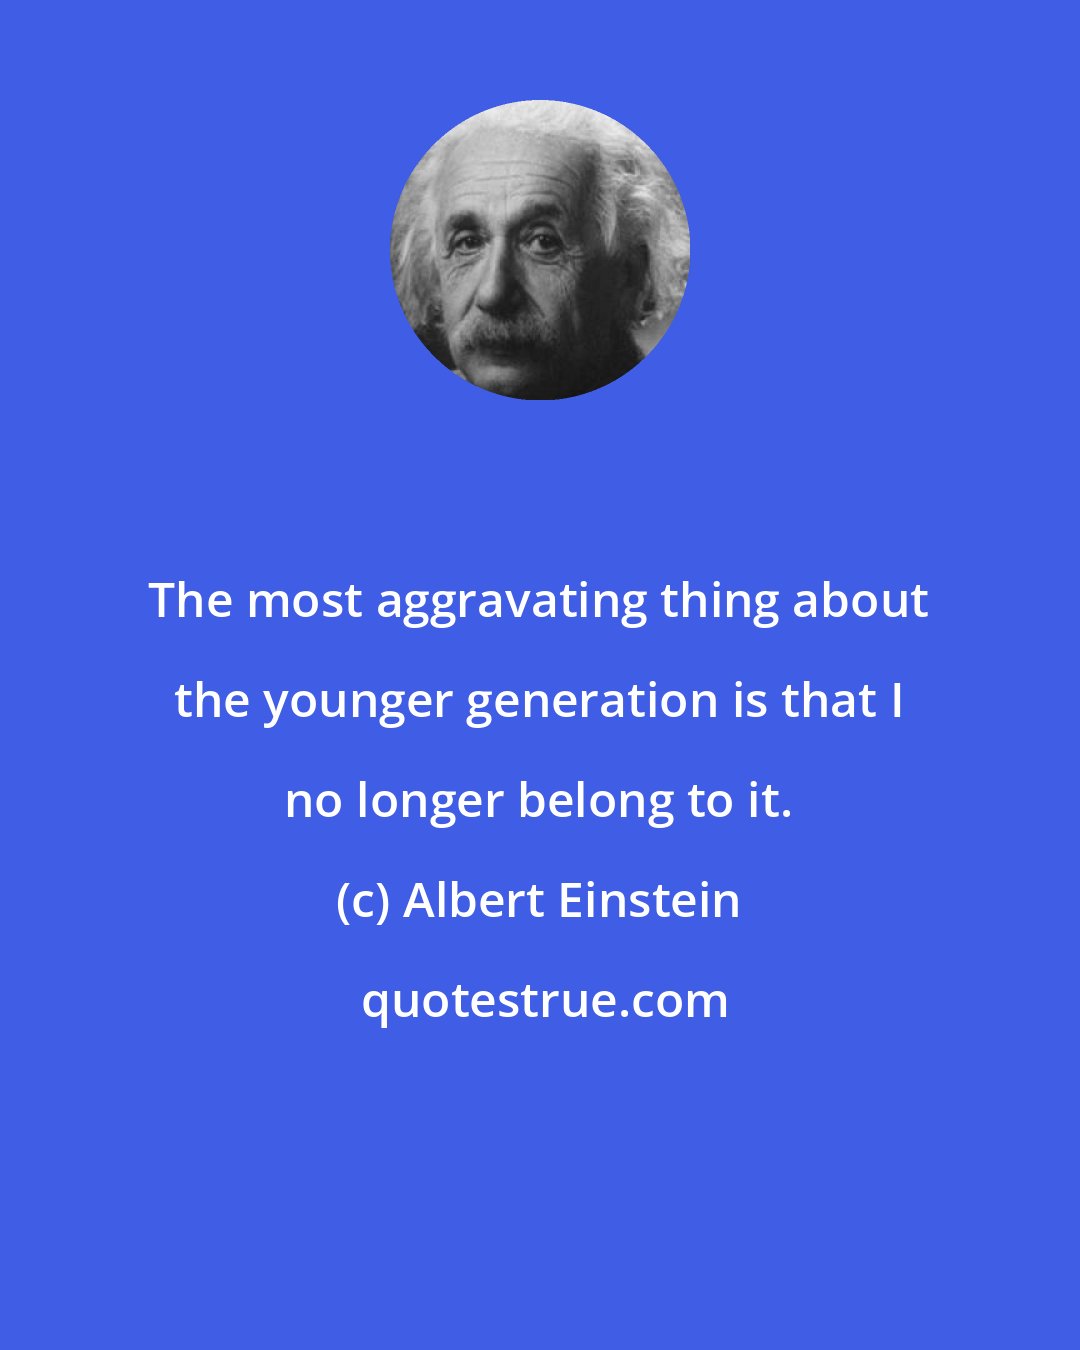 Albert Einstein: The most aggravating thing about the younger generation is that I no longer belong to it.